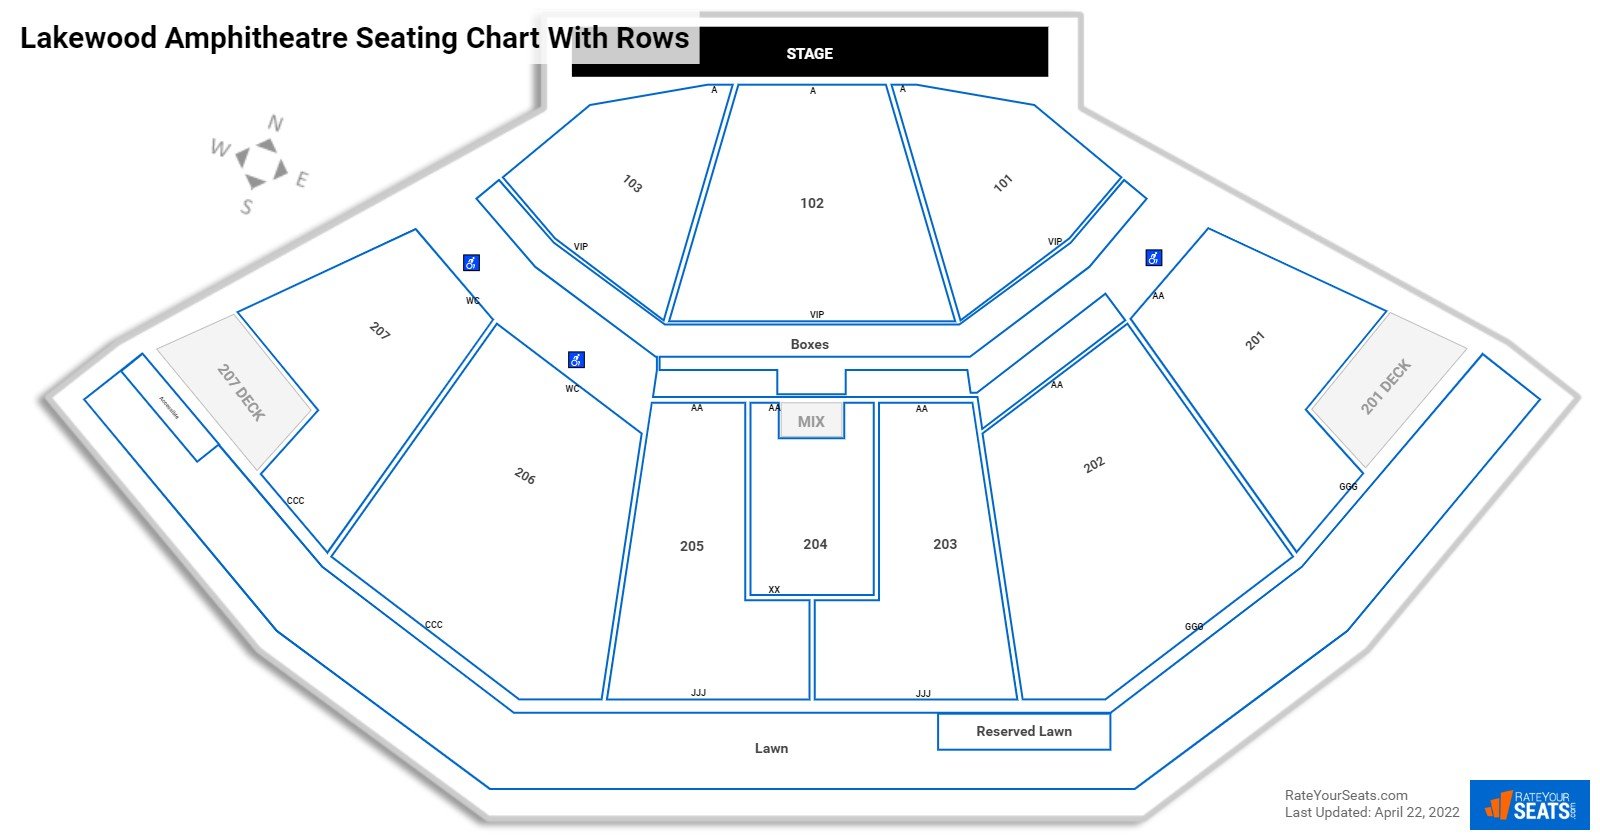 Lakewood Amphitheater Seating Chart With Seat Numbers